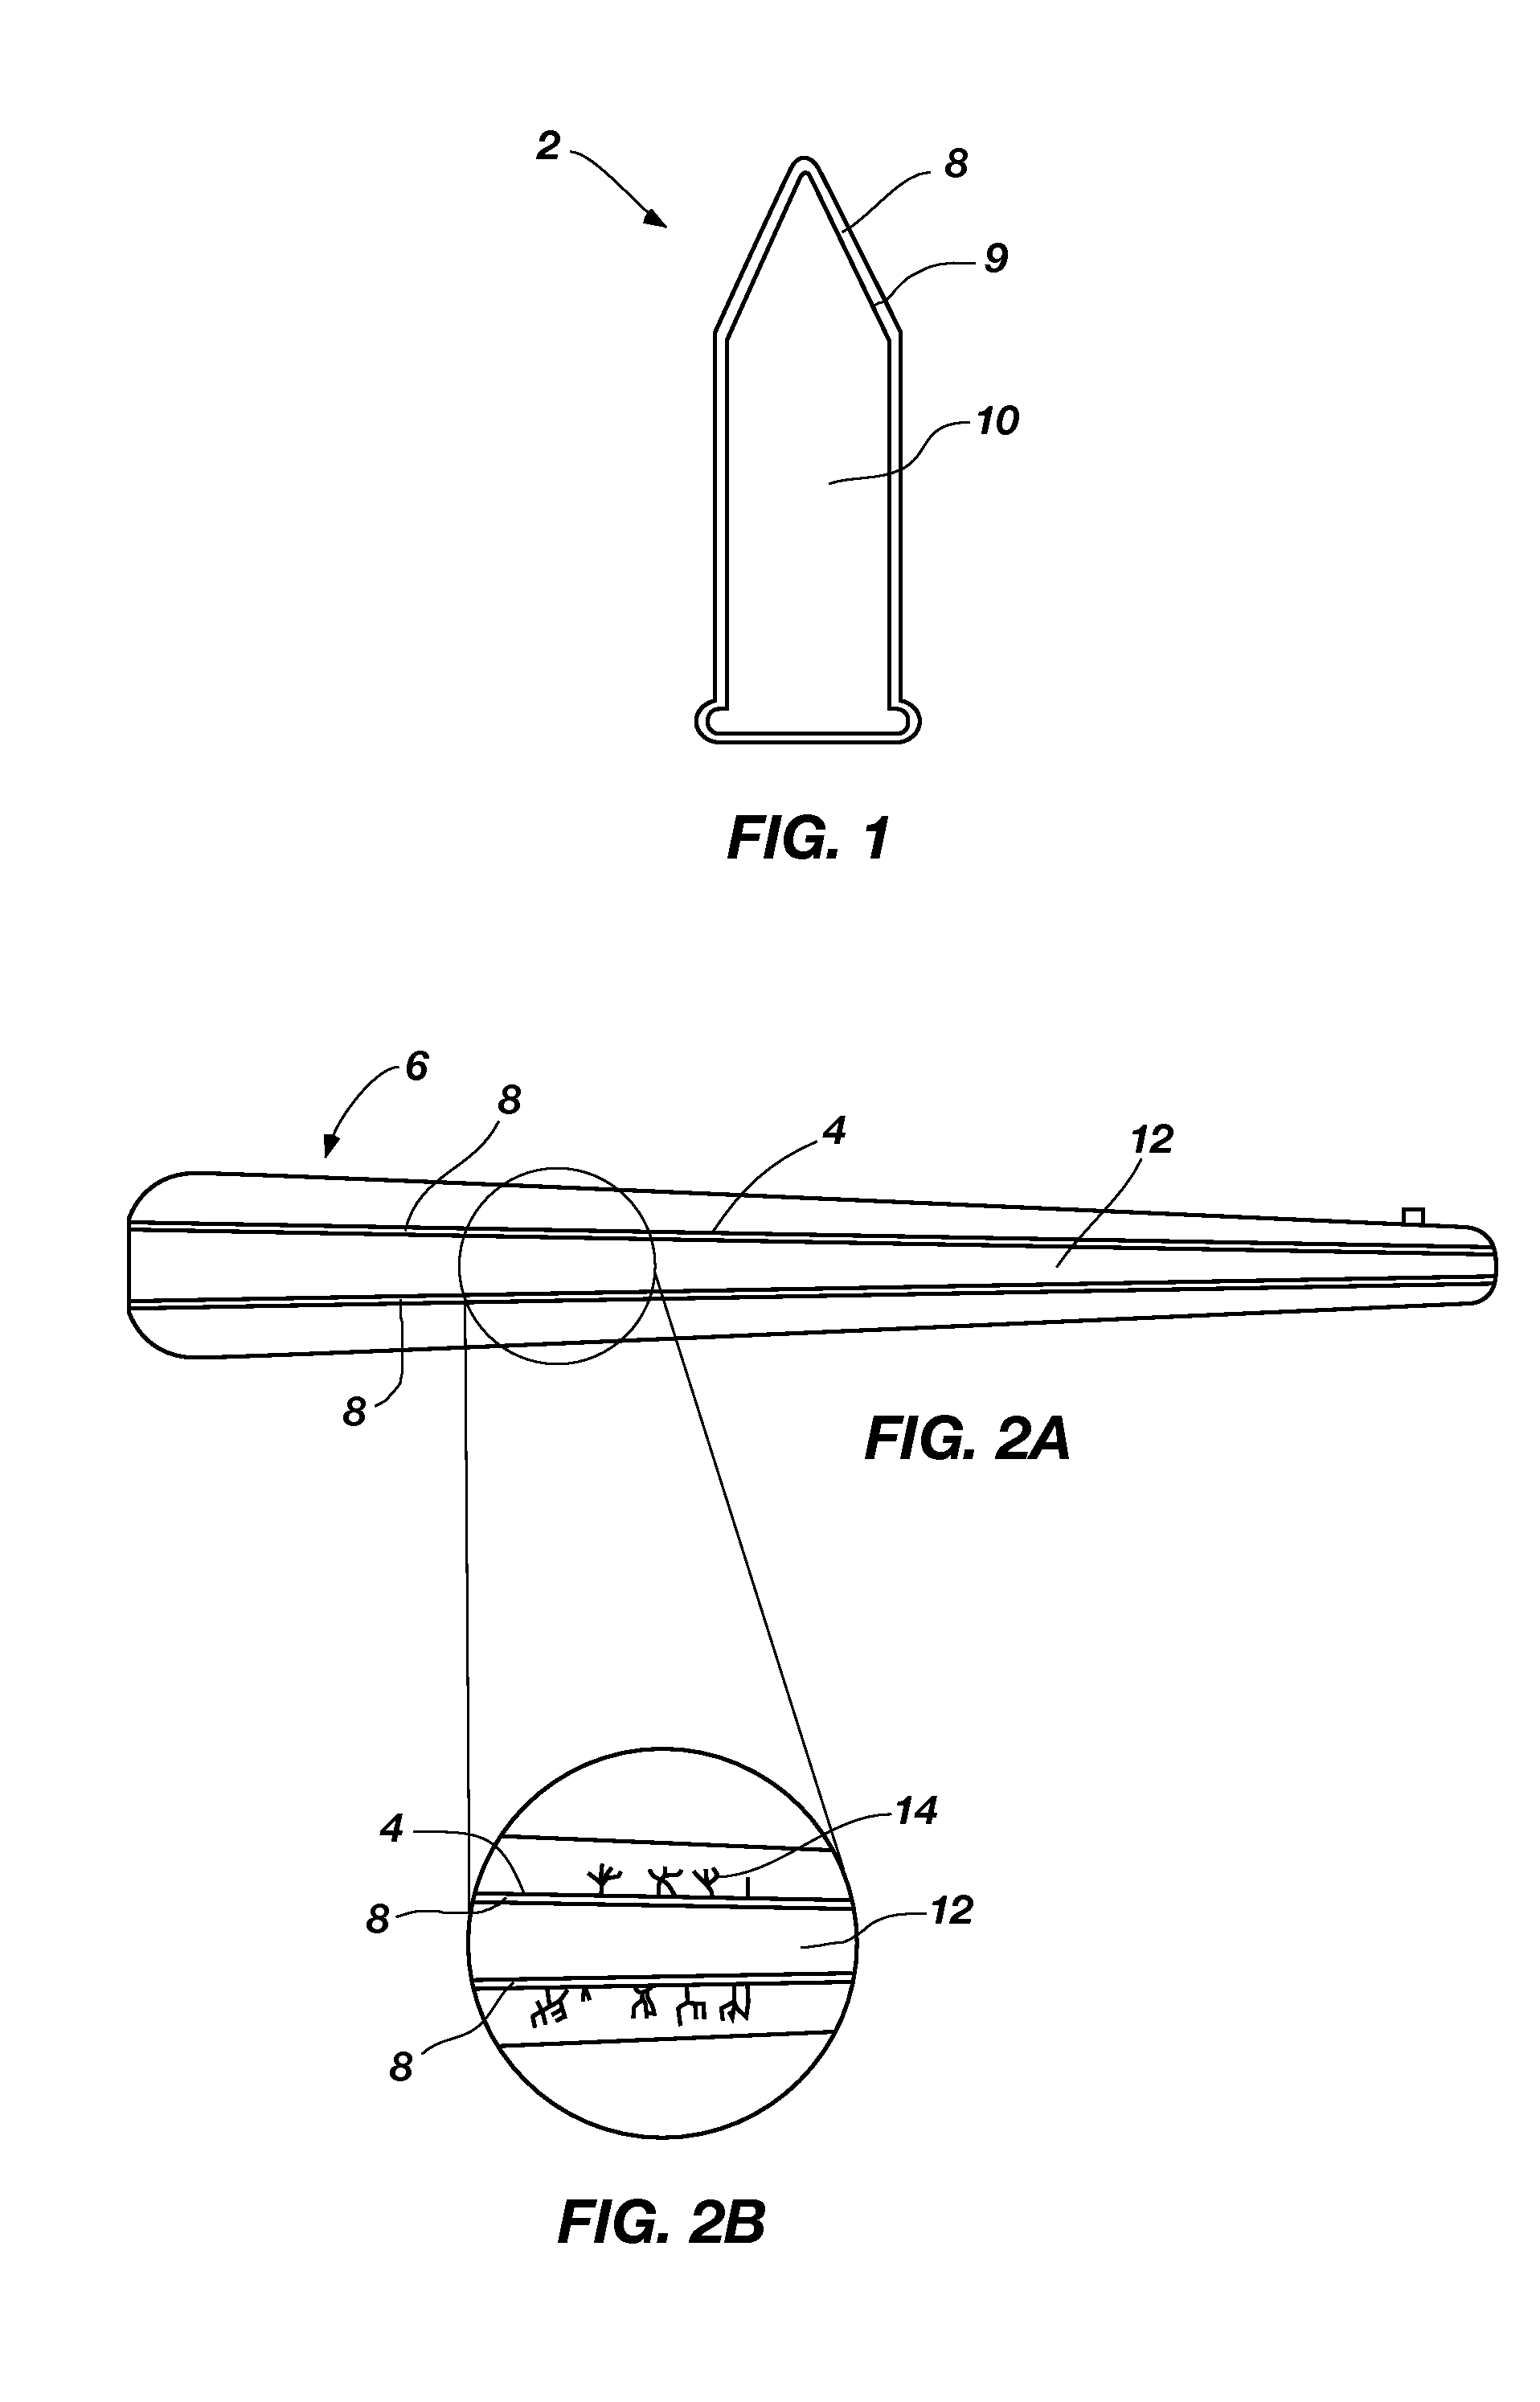 Methods of forming a boron nitride, a method of conditioning a ballistic weapon, and a metal article coated with a monomeric boron-nitrogen compound